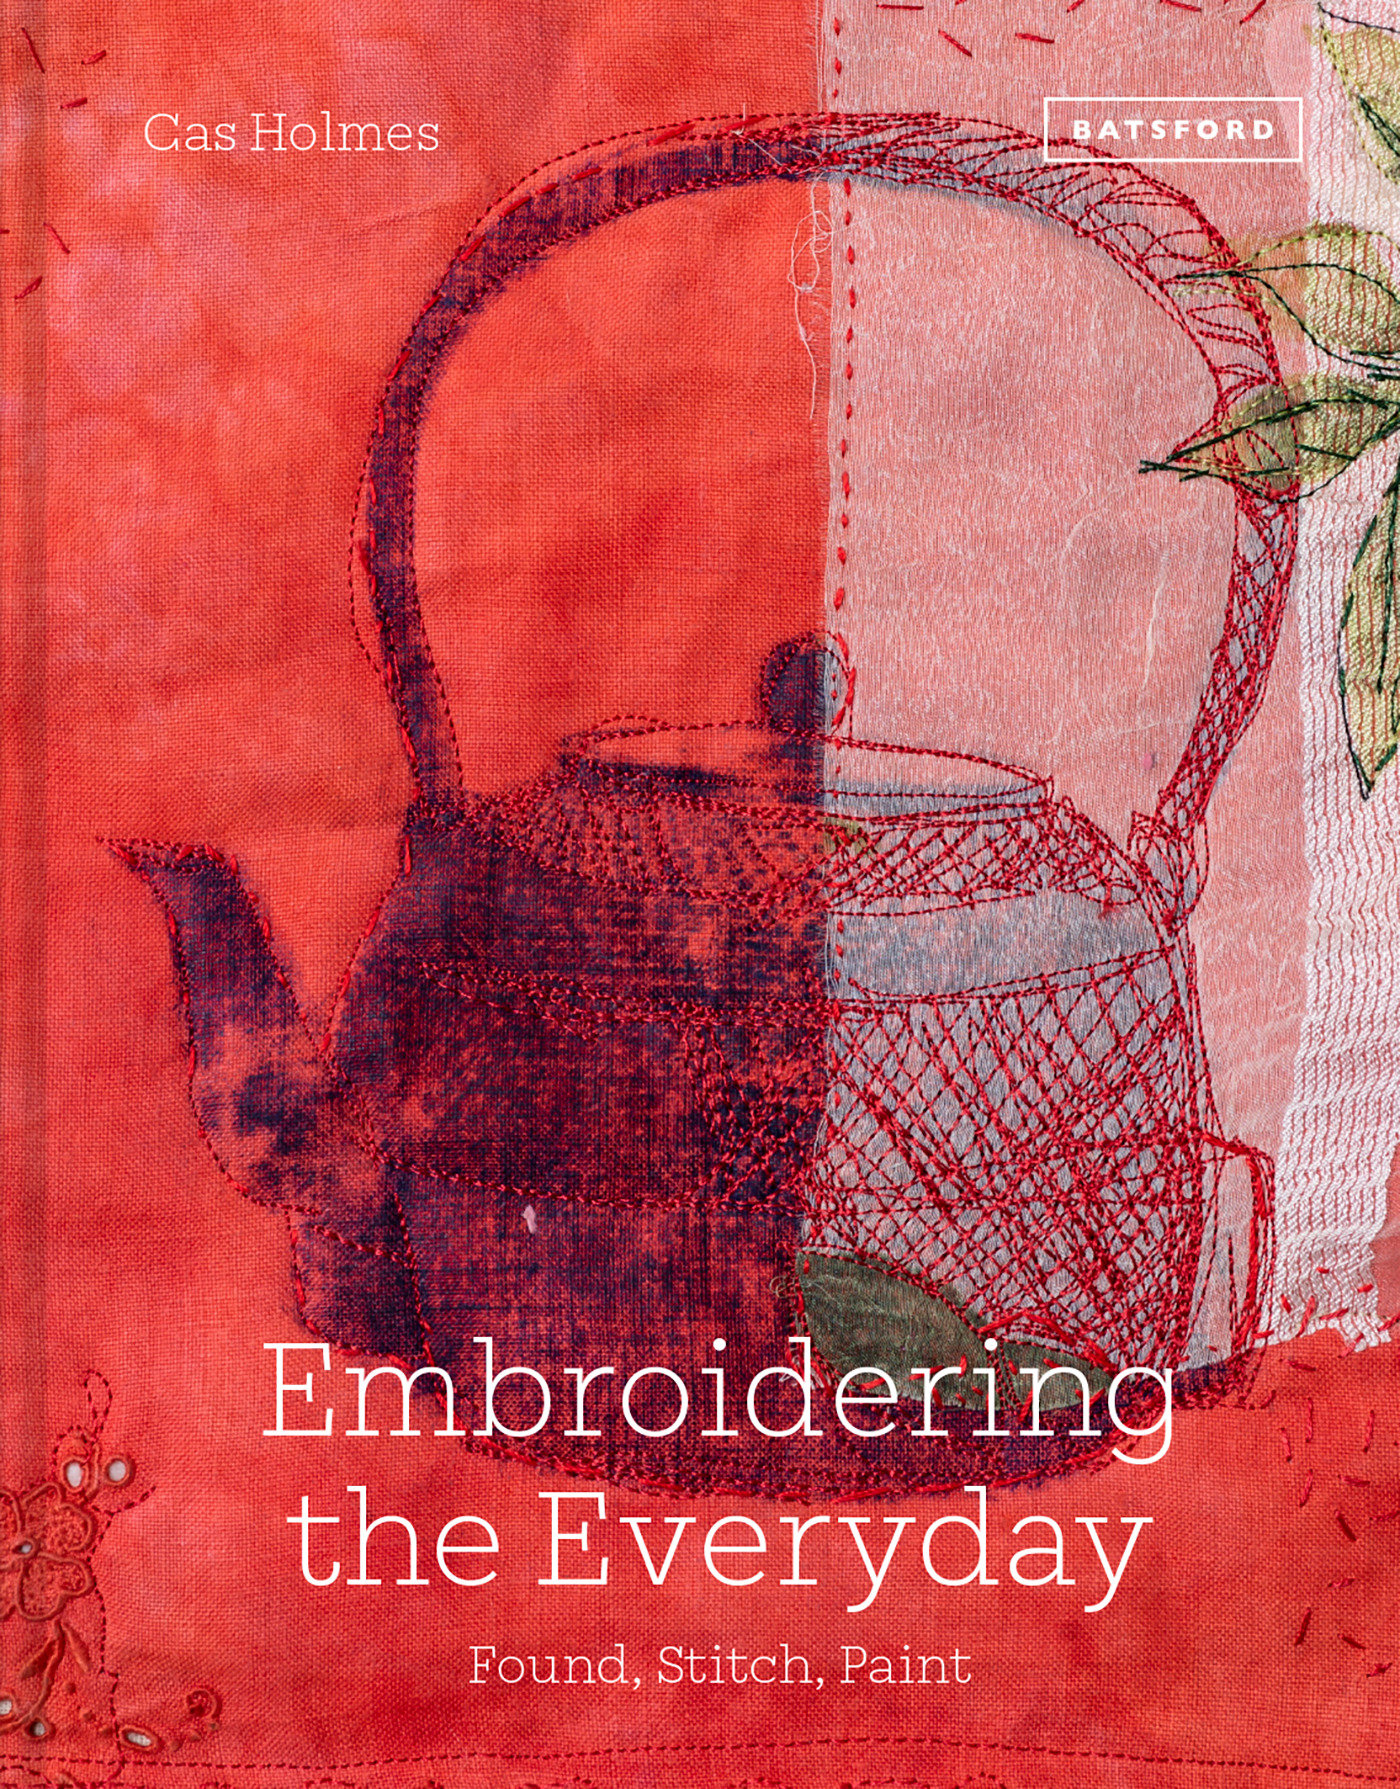 Embroidering The Everyday (Hardcover Book)